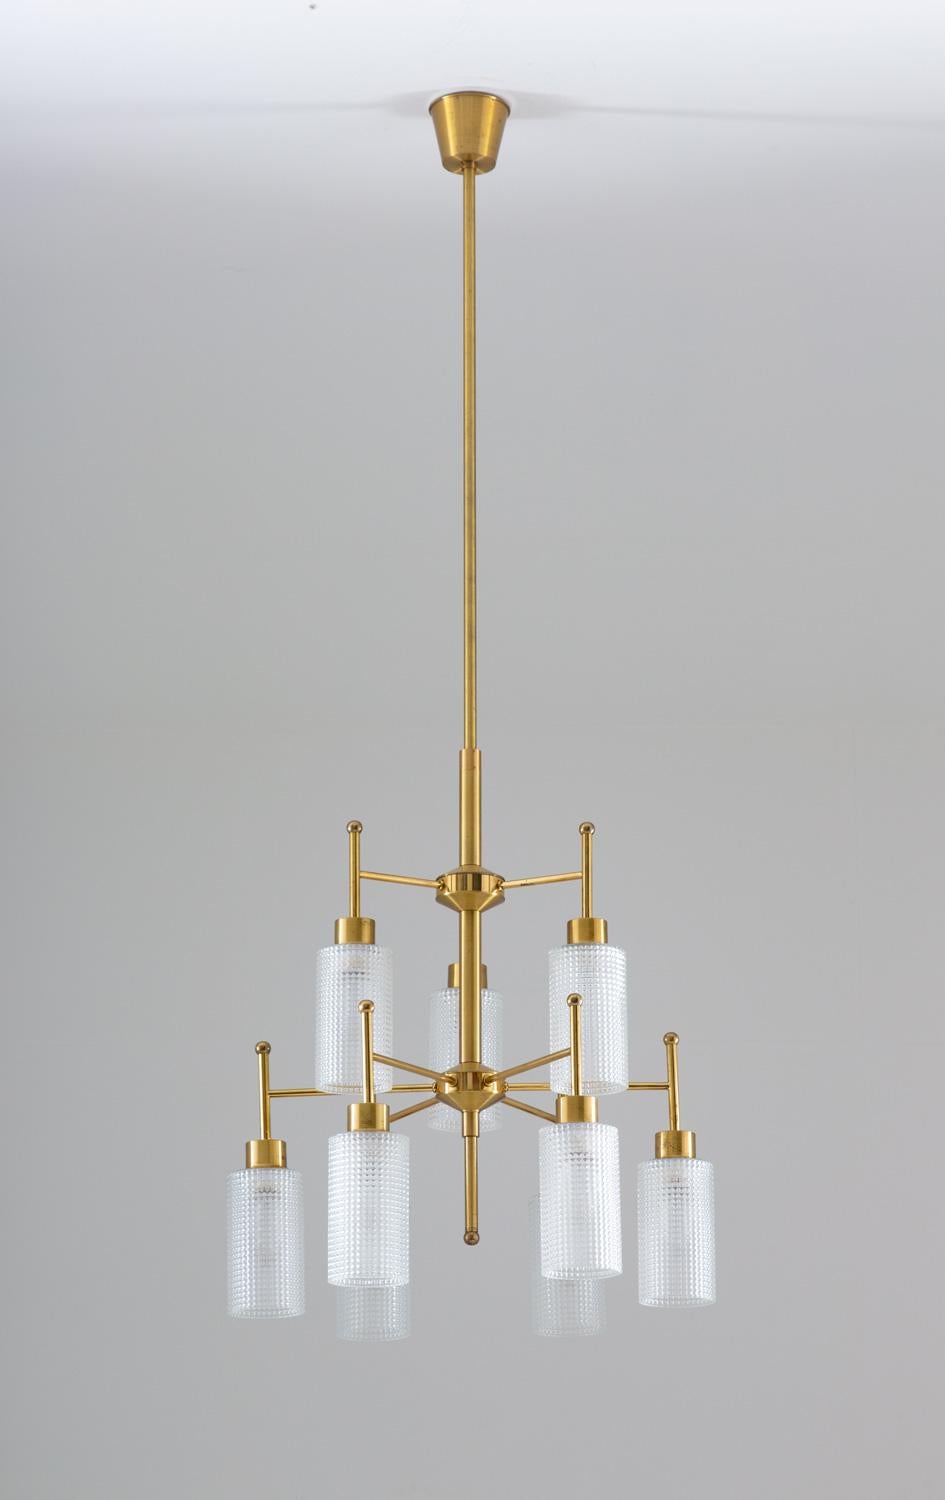 Mid century modern chandeliers by Holger Johansson for Westal, Sweden.
The chandeliers consist of nine round brass poles divided into two levels, each holding a cylinder-shaped glass shade.
The rods can be adjusted to your desired